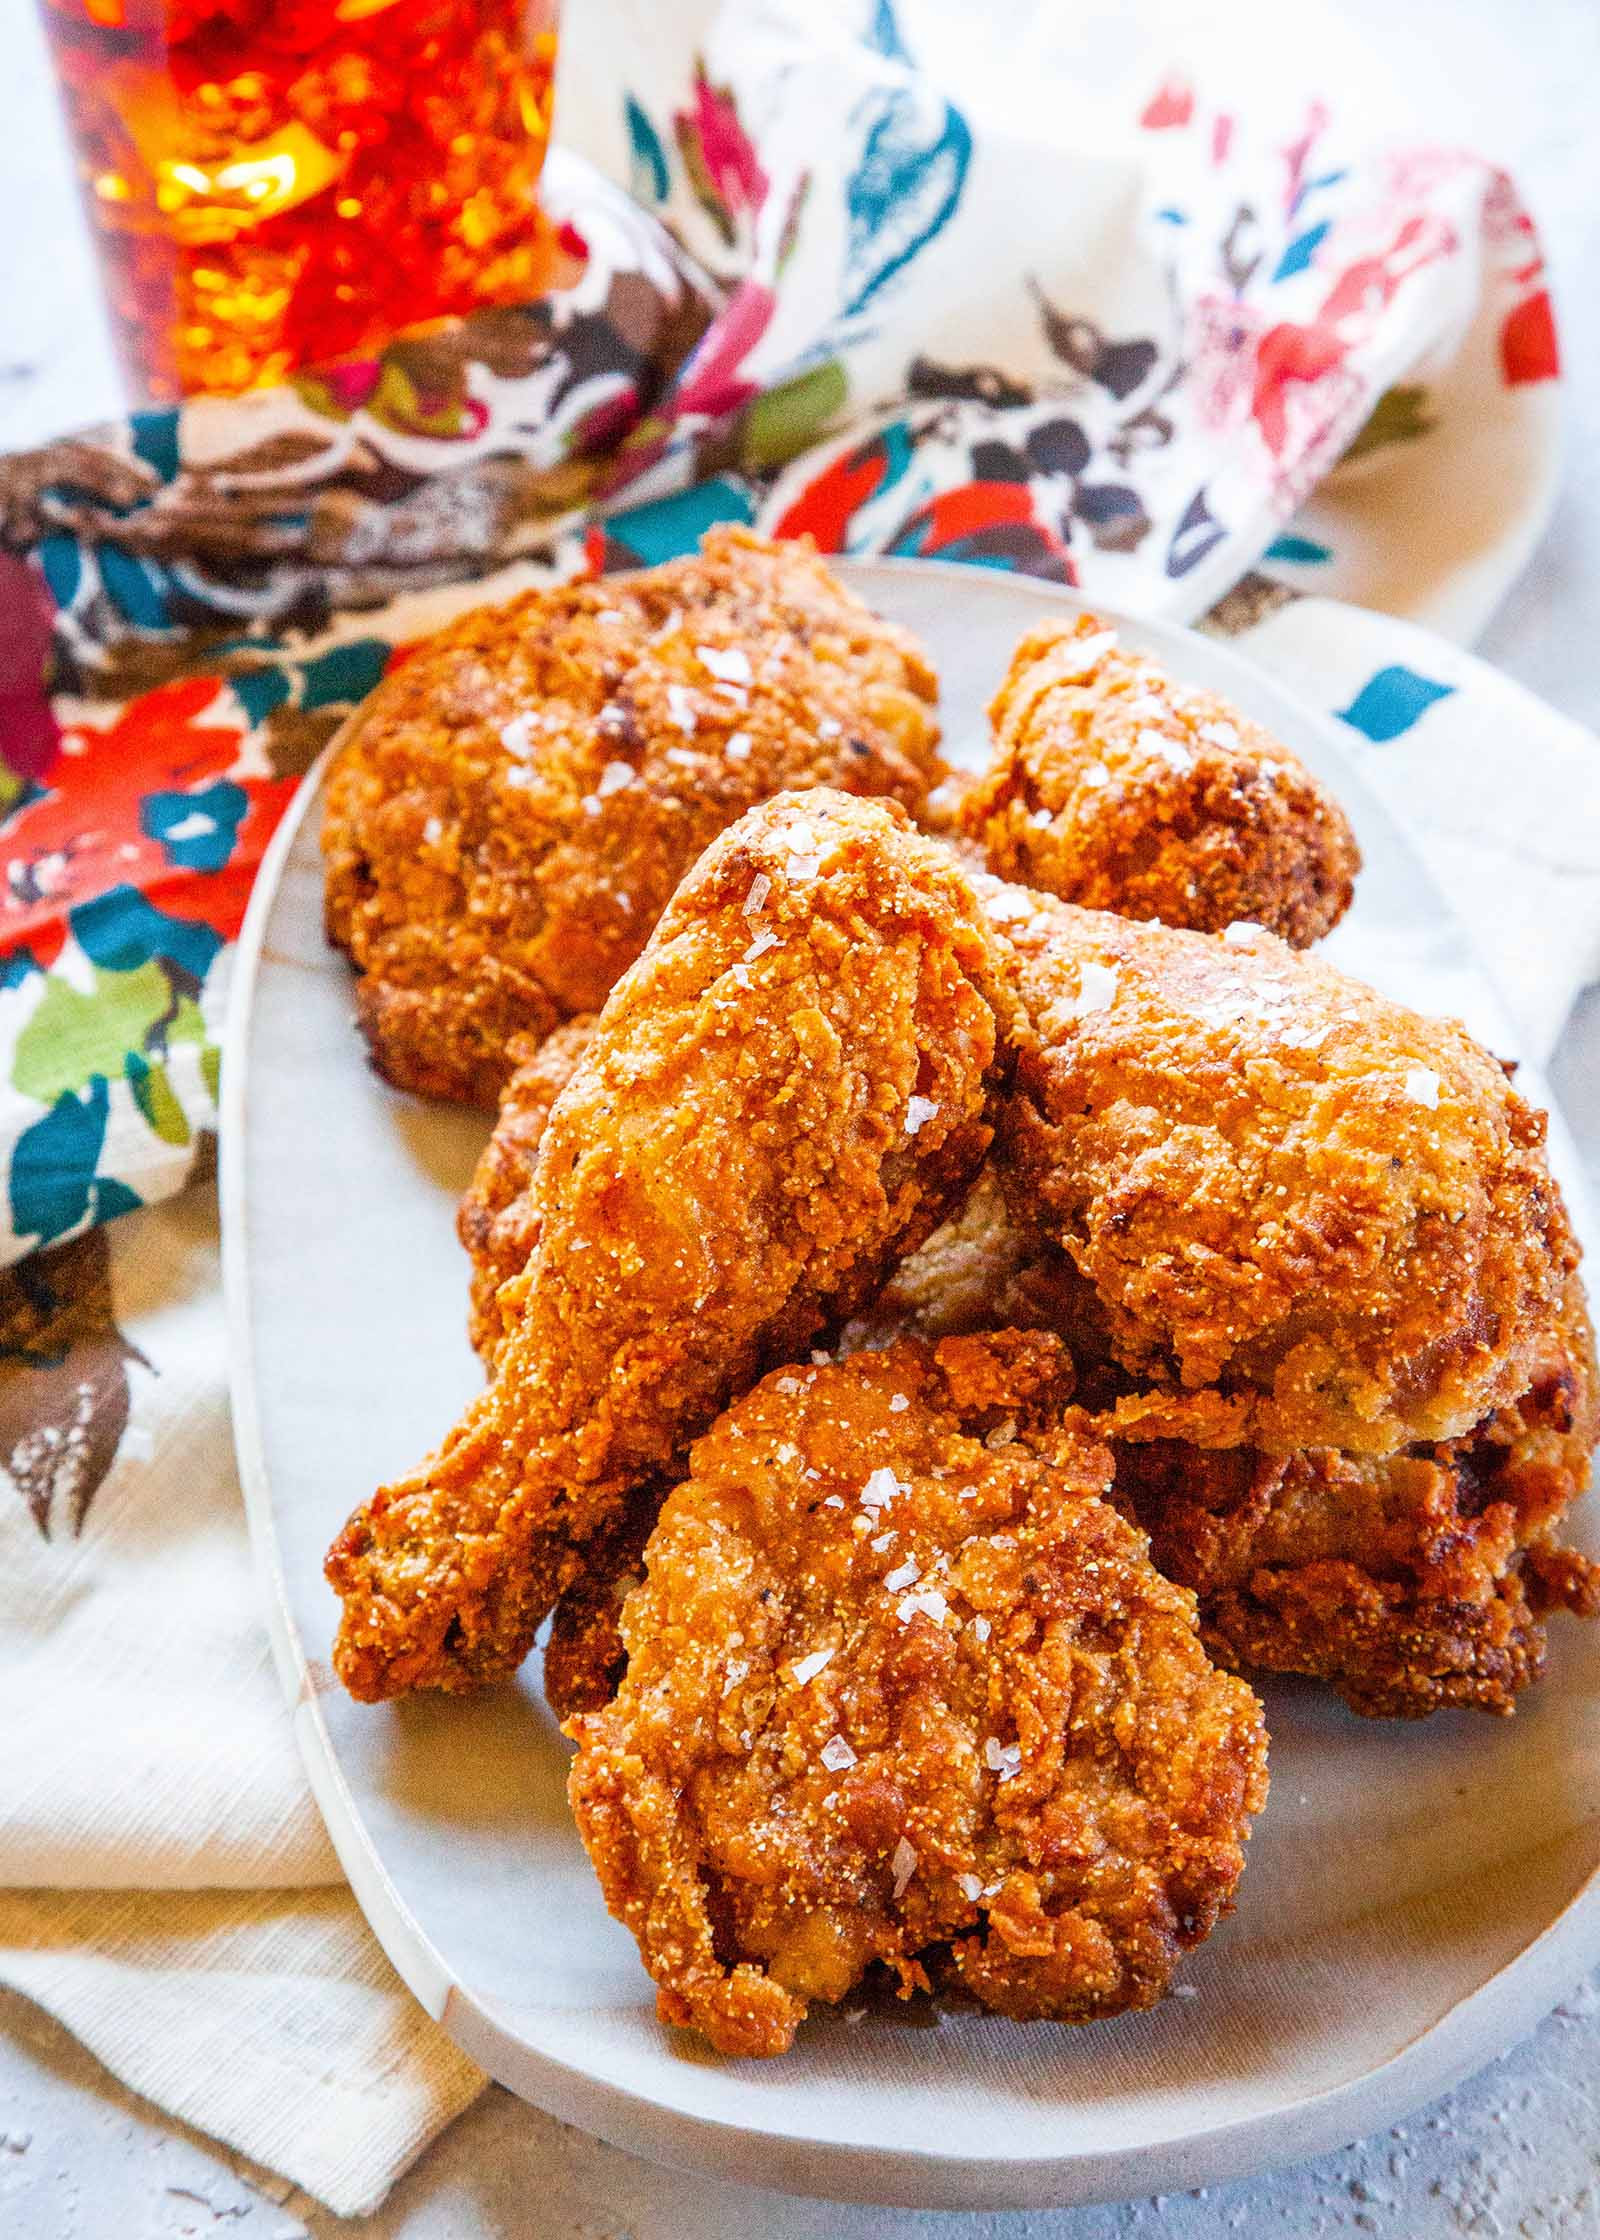 30 Best Maryland's Fried Chicken - Best Recipes Ideas and Collections